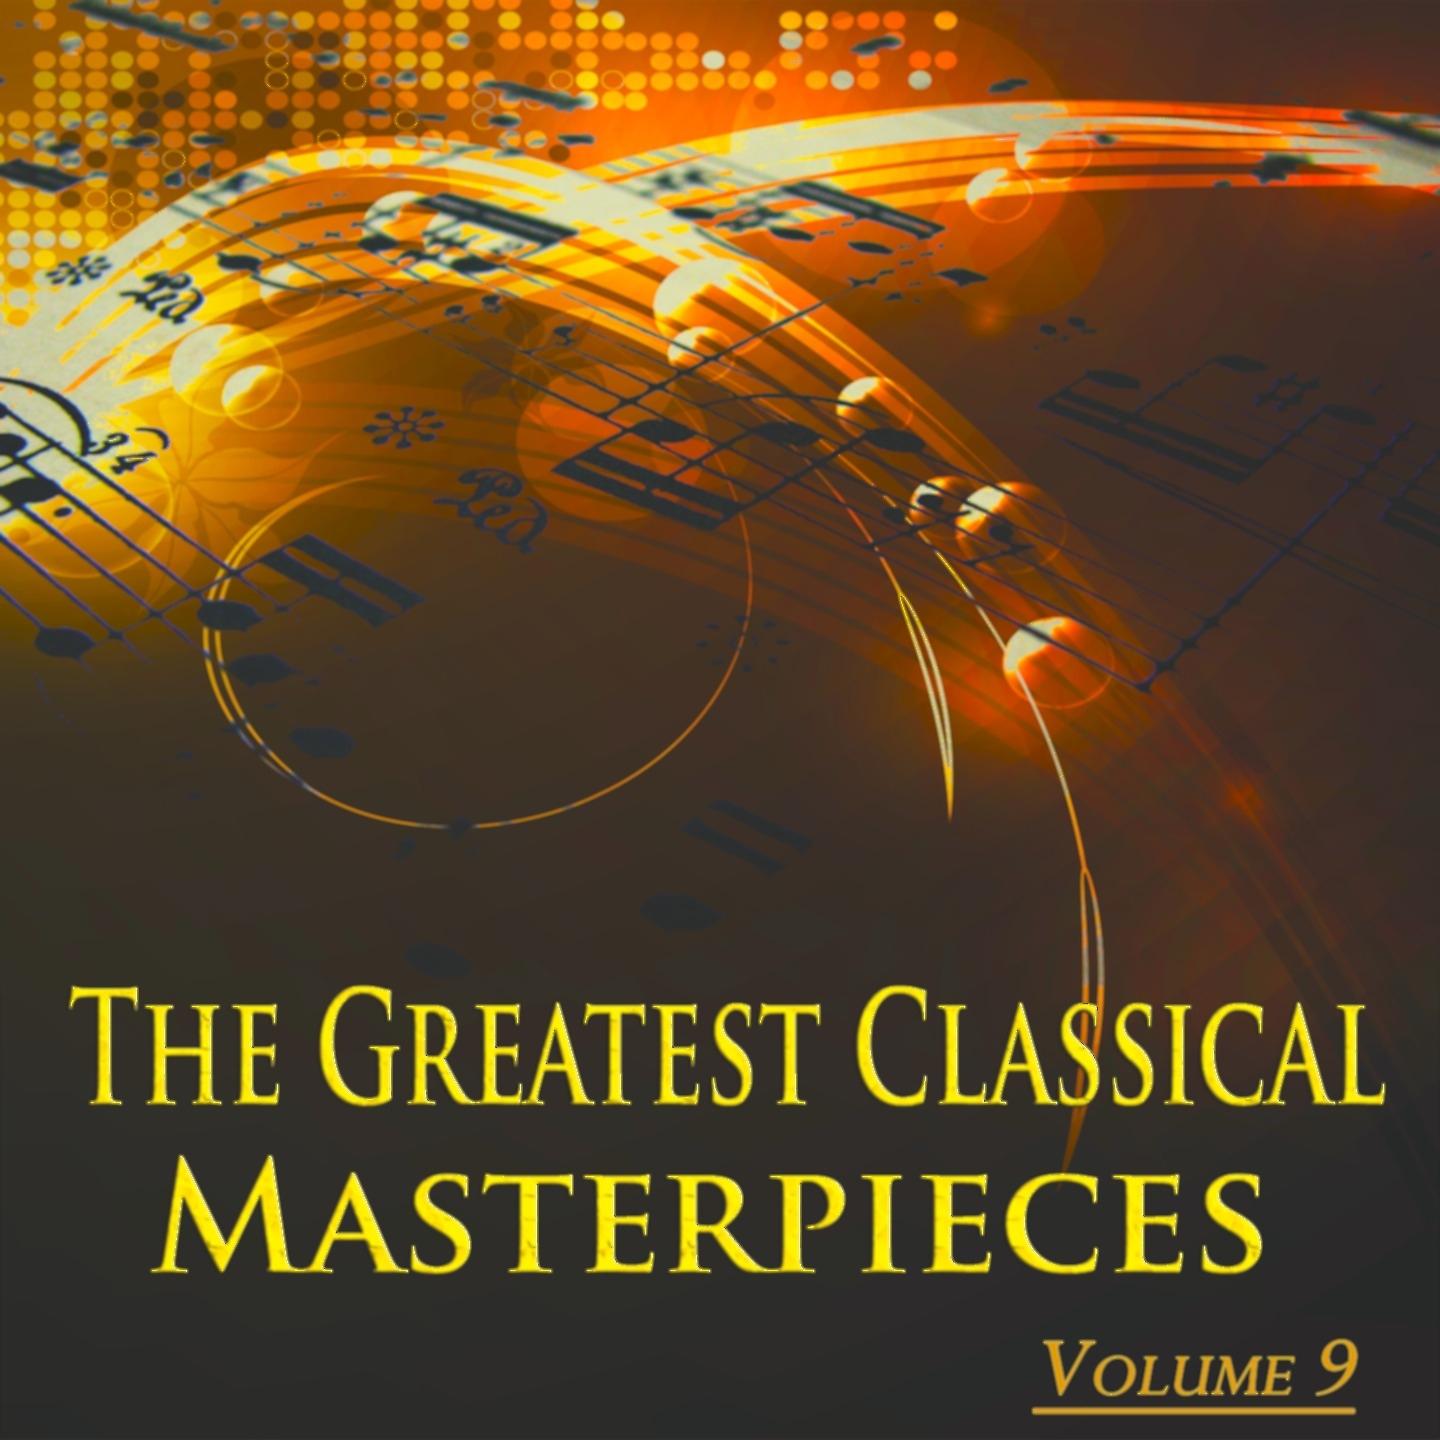 The Greatest Classical Masterpieces, Vol. 9 (Original Recordings - Remastered)